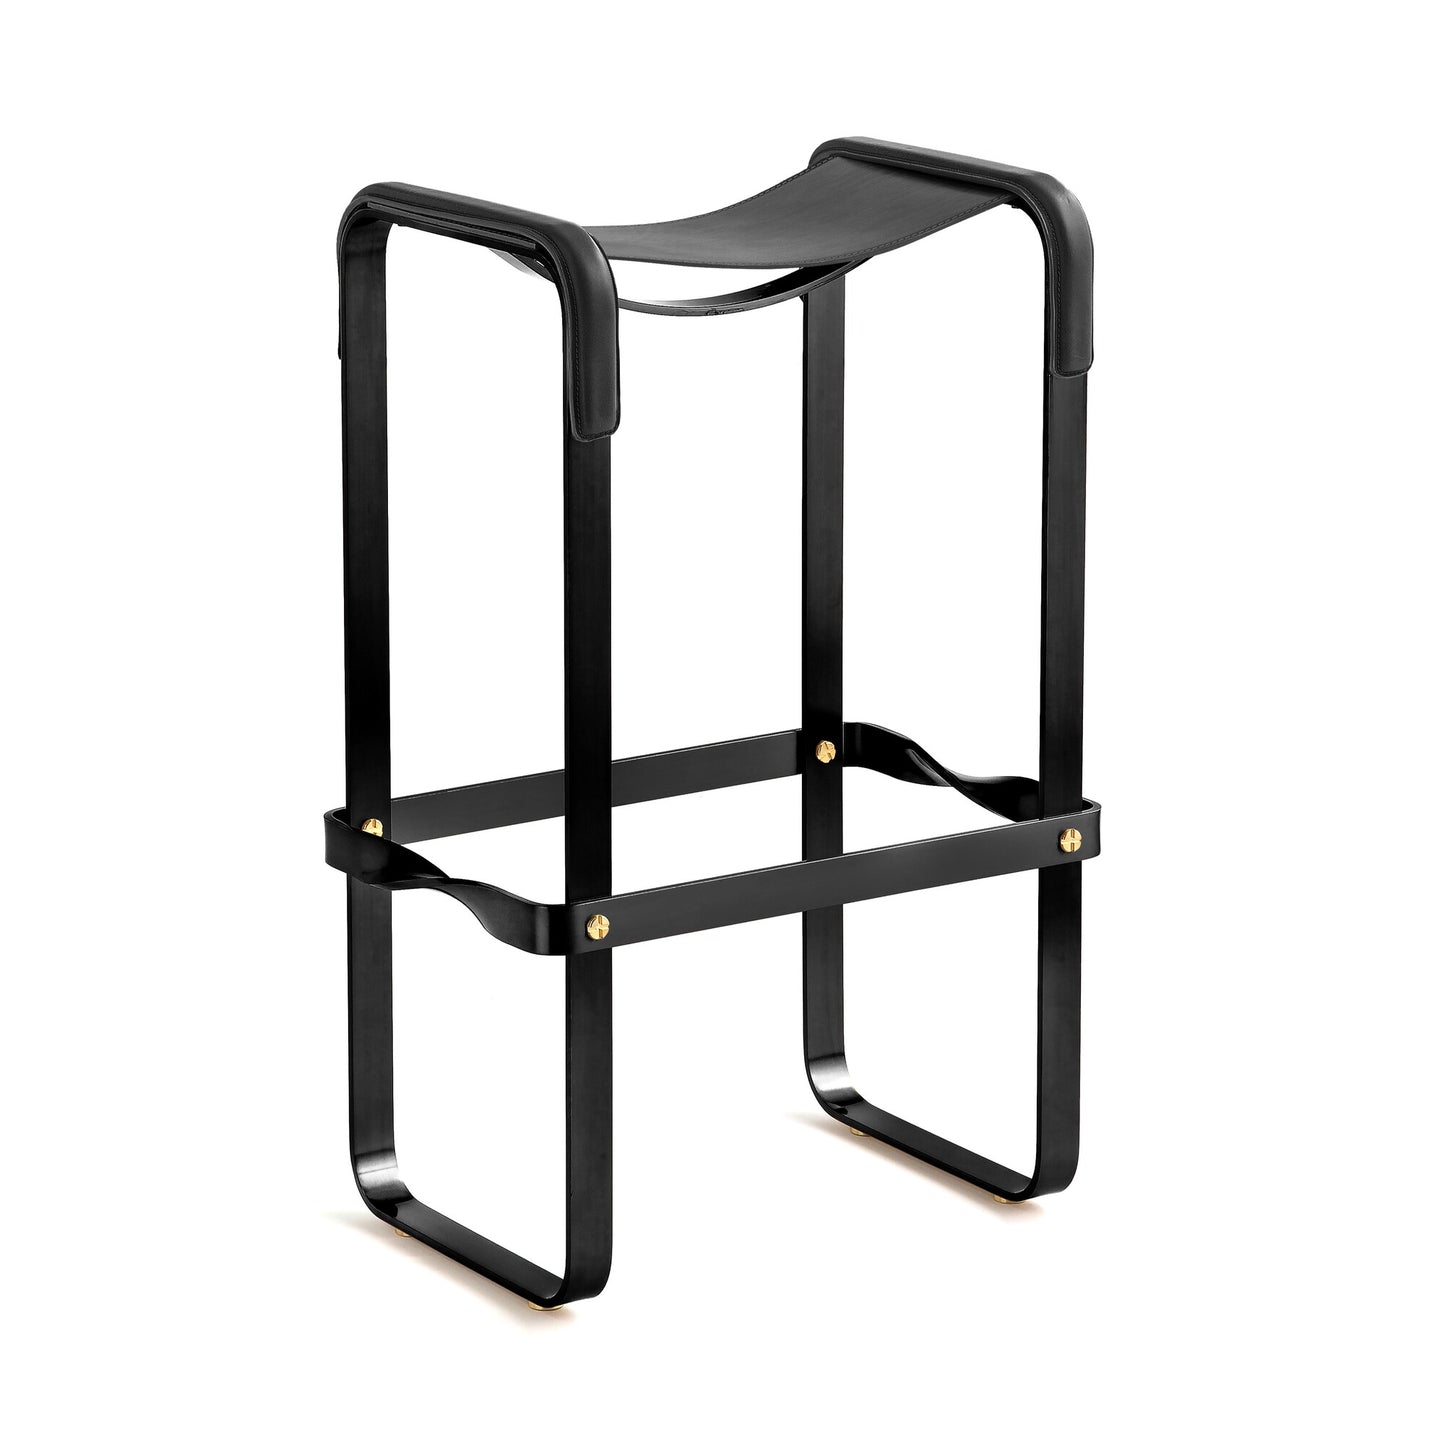 Wanderlust Bar Stool - Hancrafted in Leather & Steel, Customizable